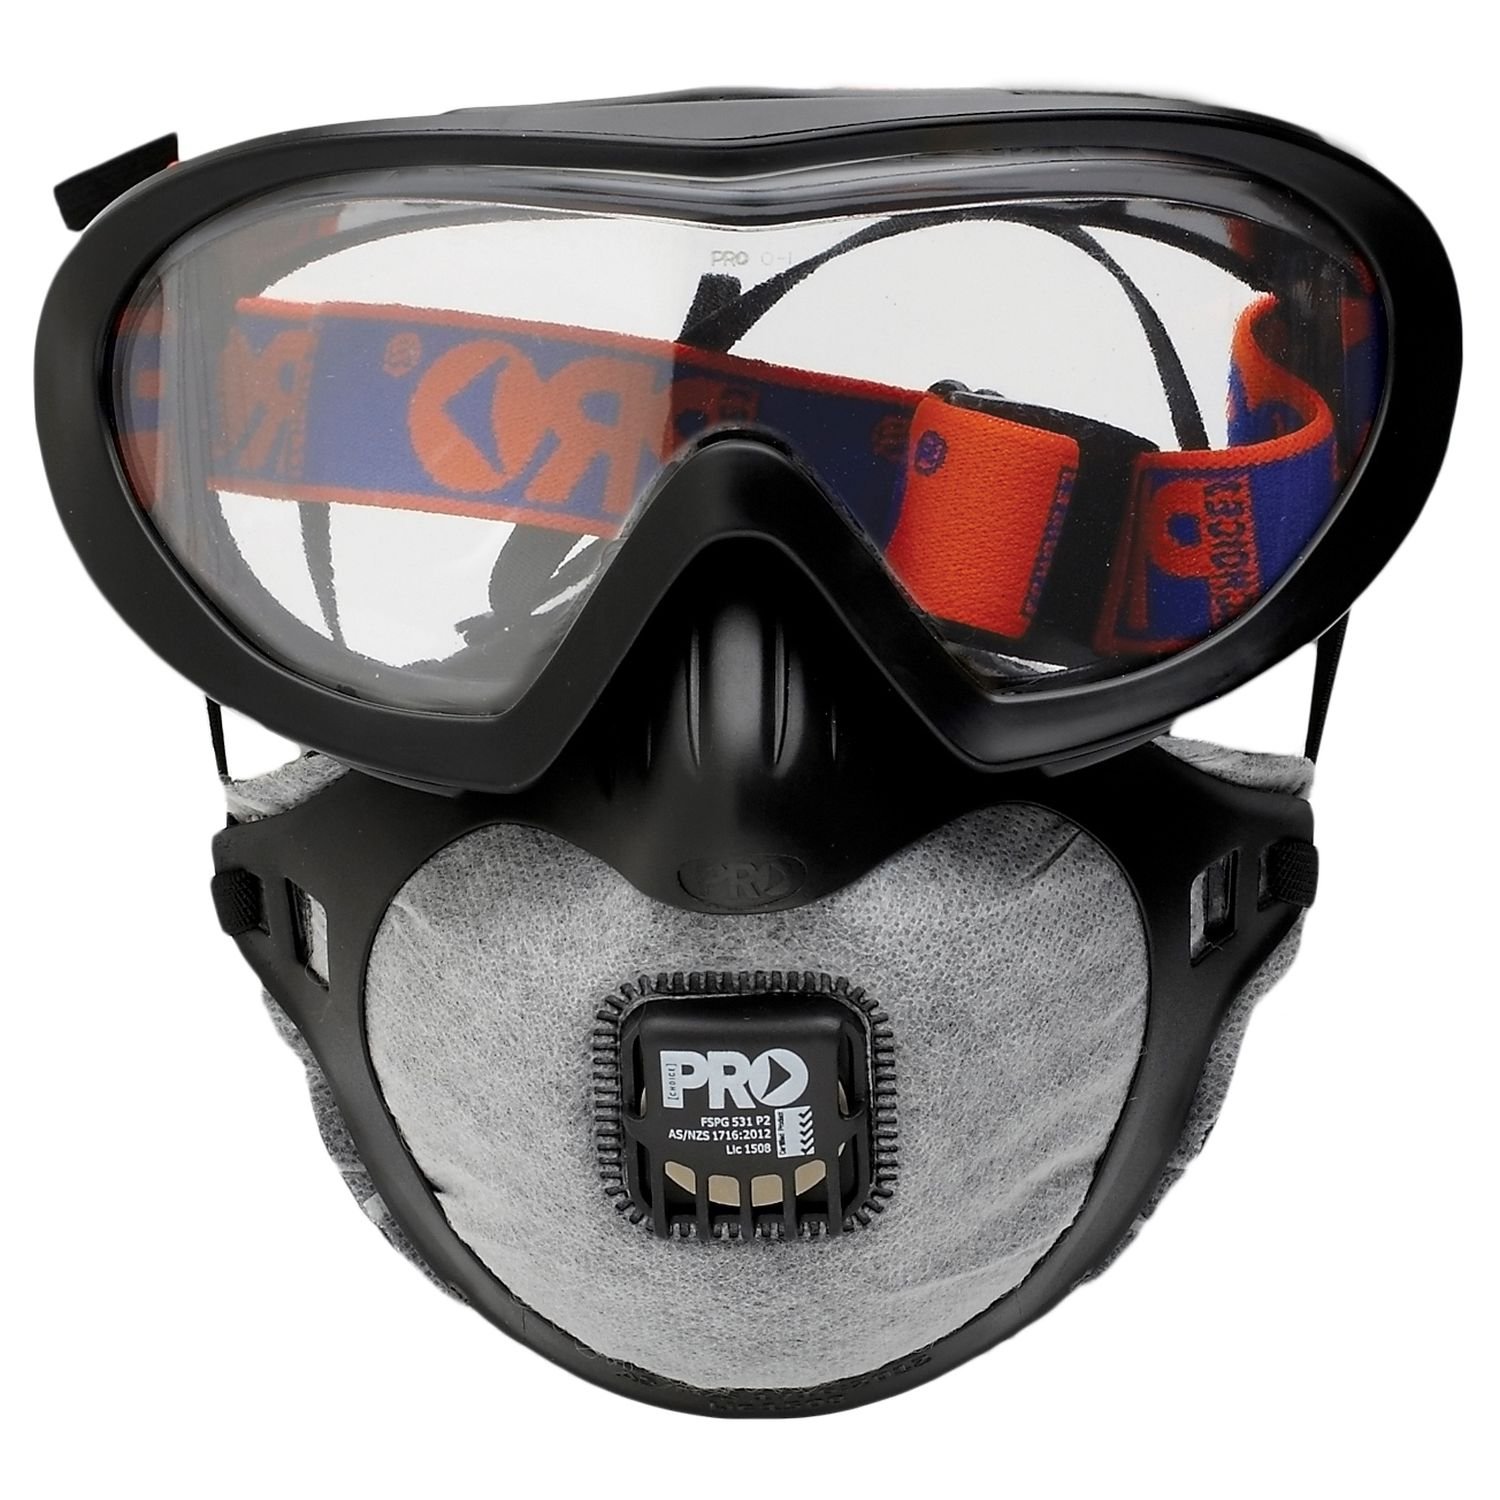 FilterSpec Pro Goggle Dust Mask Combo